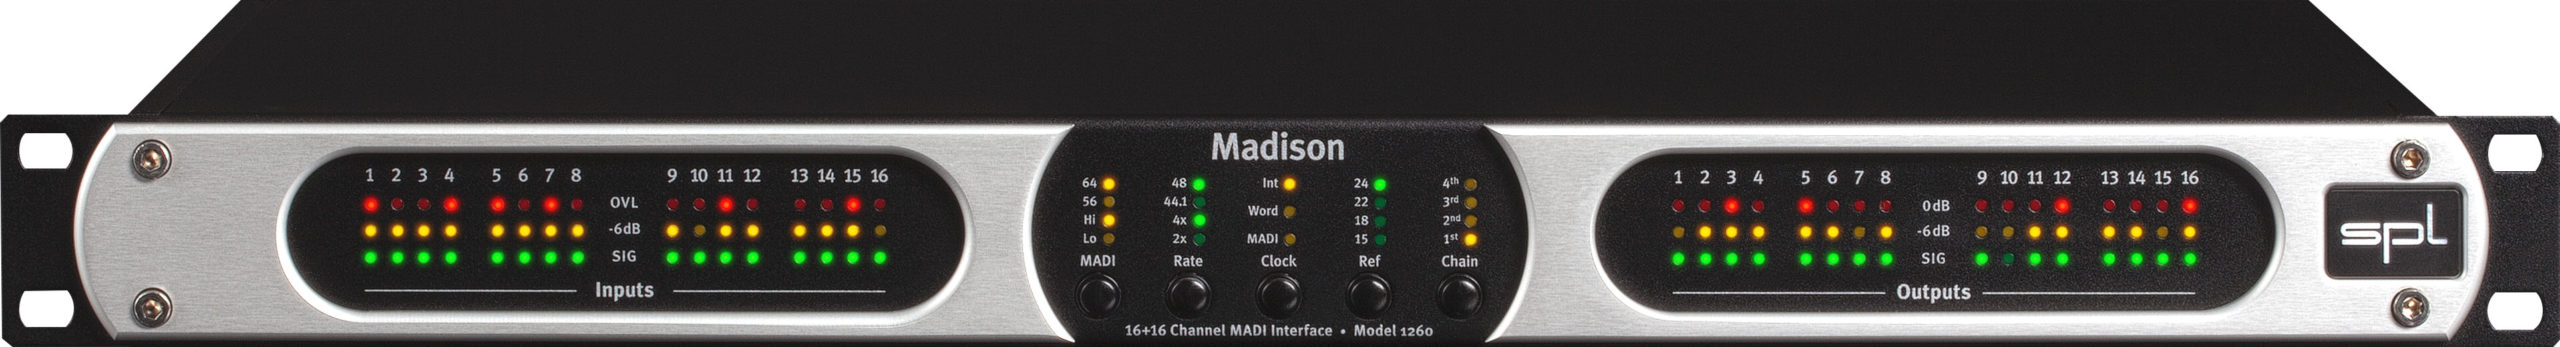 madison_silber_LEDs_an_front